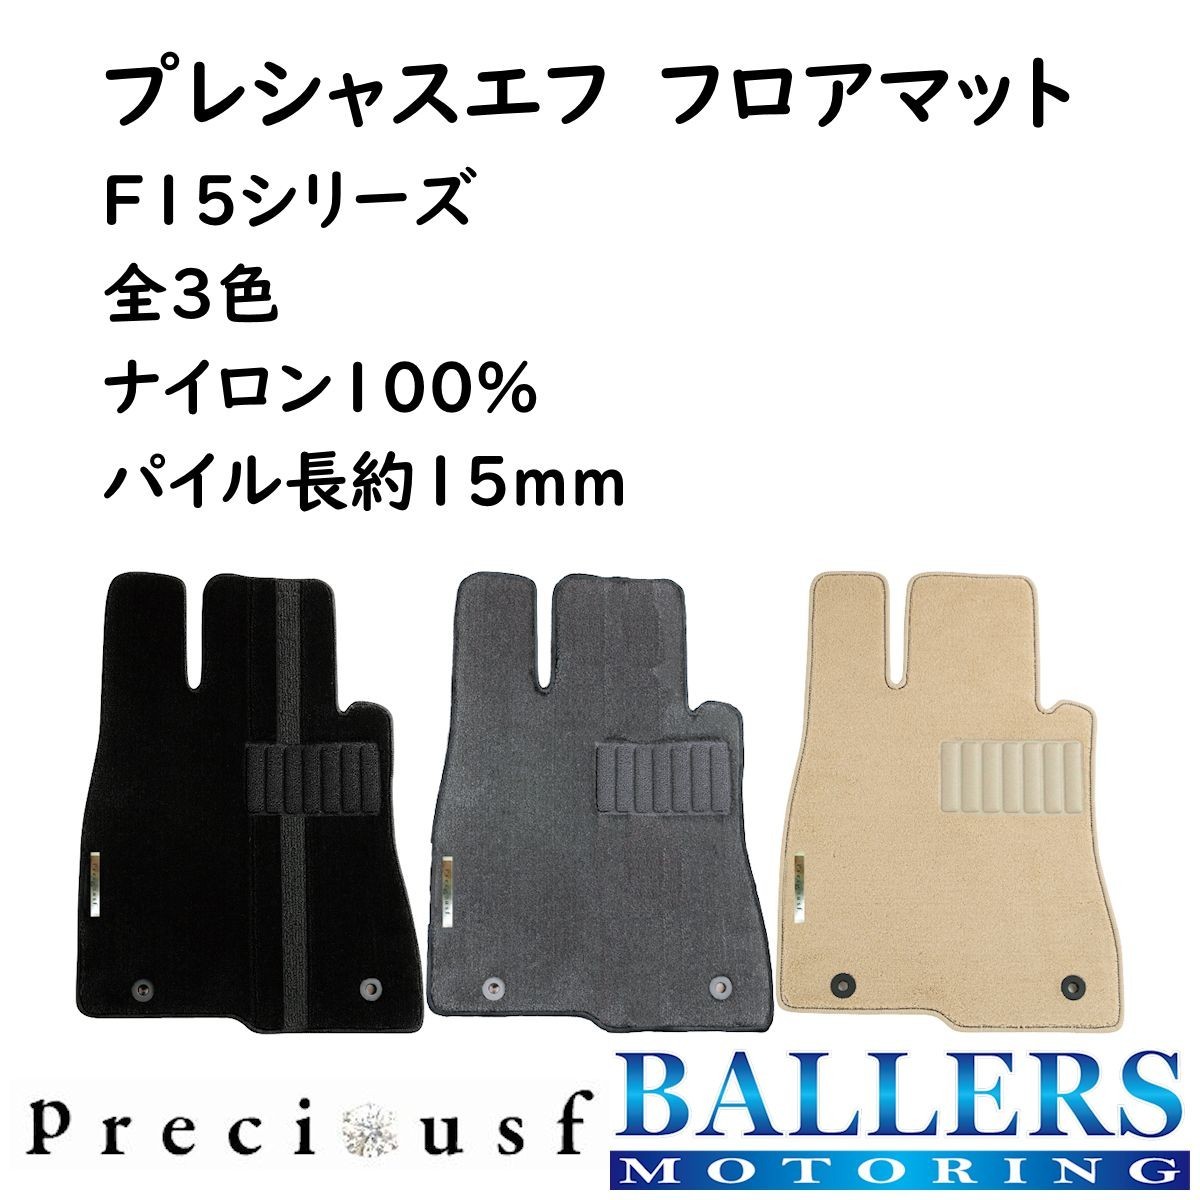  Volvo V60 2011/3~ floor mat F15 series Precious ef custom-made made in Japan build-to-order manufacturing 4 pieces set Preciousf Volvo